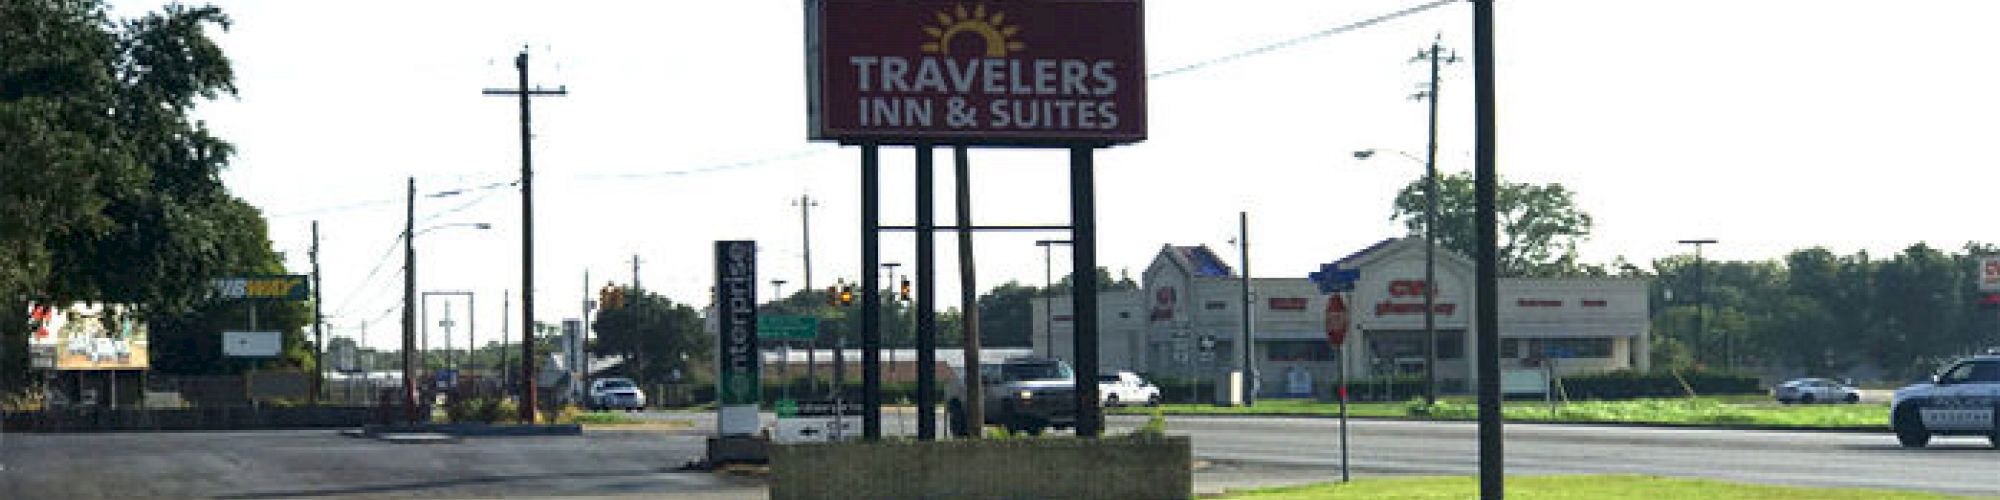 travelers Inn and Suites